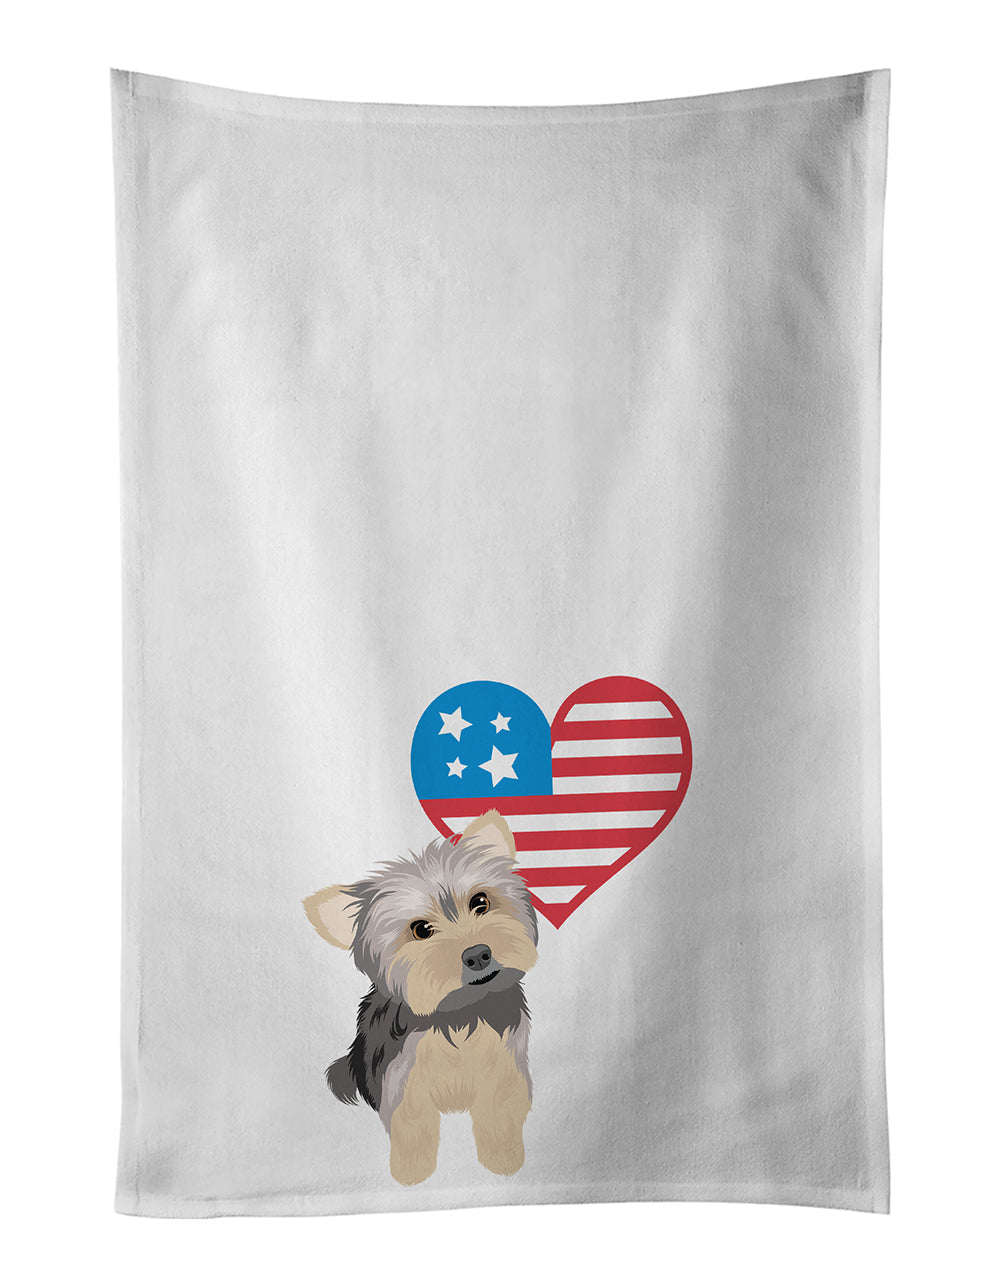 Buy this Yorkie Blue and Tan #2 Patriotic White Kitchen Towel Set of 2